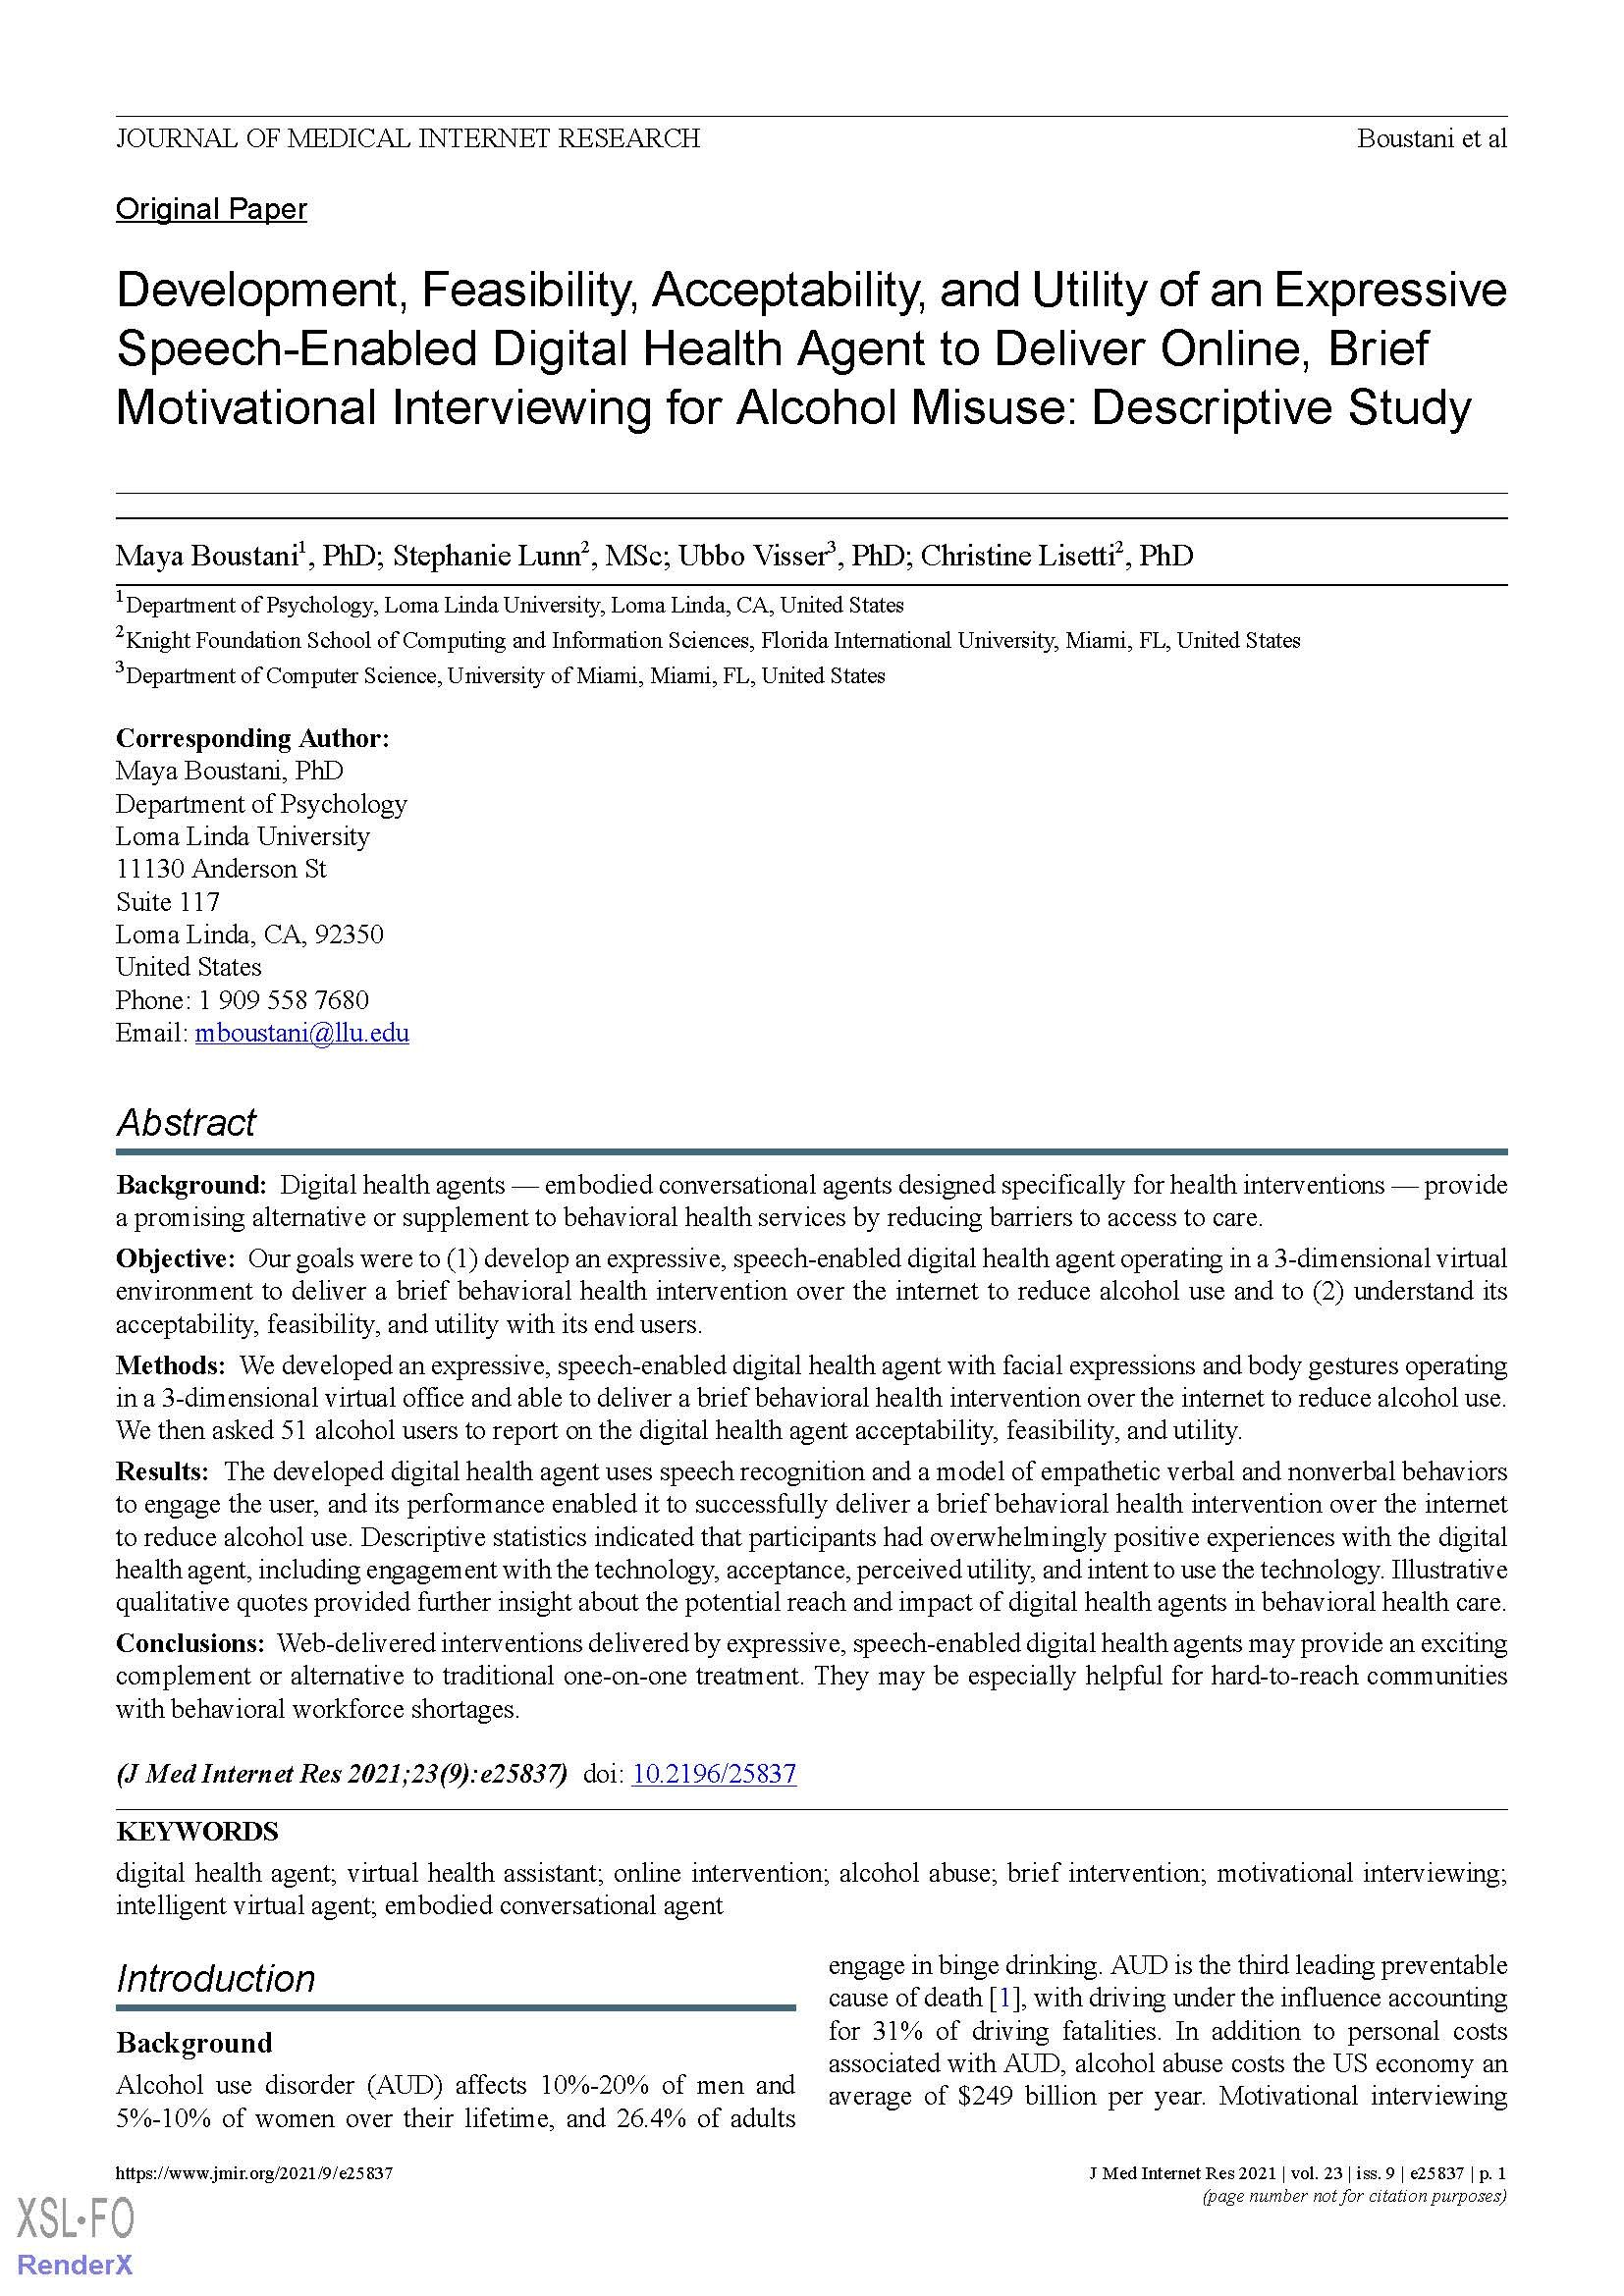 Development, feasibility, acceptability, and utility of an expressive speech-enabled digital health agent to deliver online, brief motivational interviewing for alcohol misuse: Descriptive study